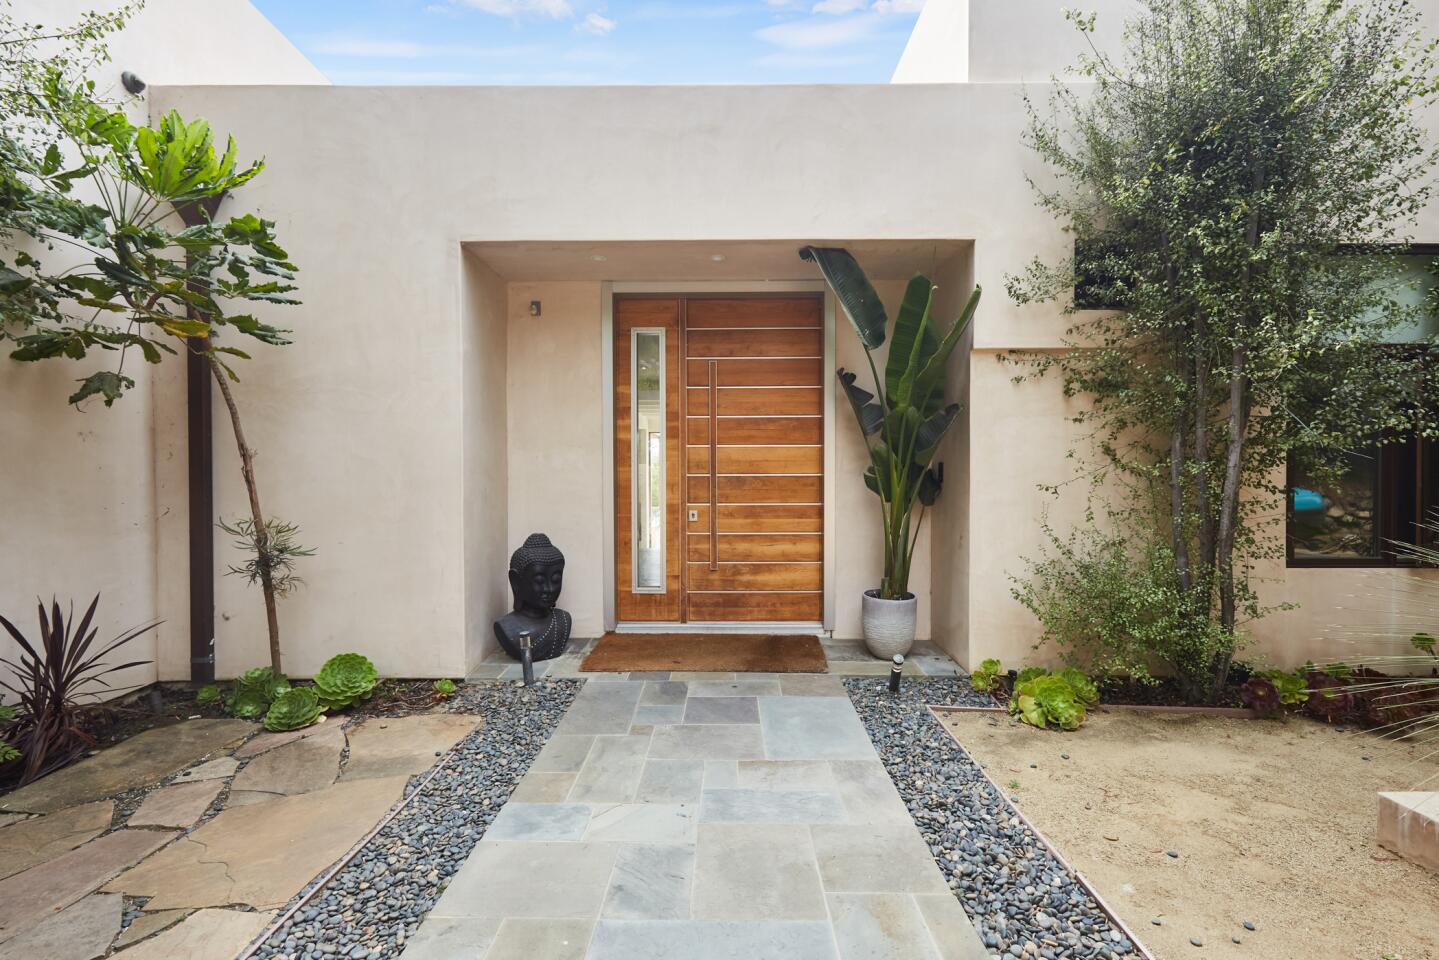 Stone pavers lead to the front door in a modular, modern exterior.